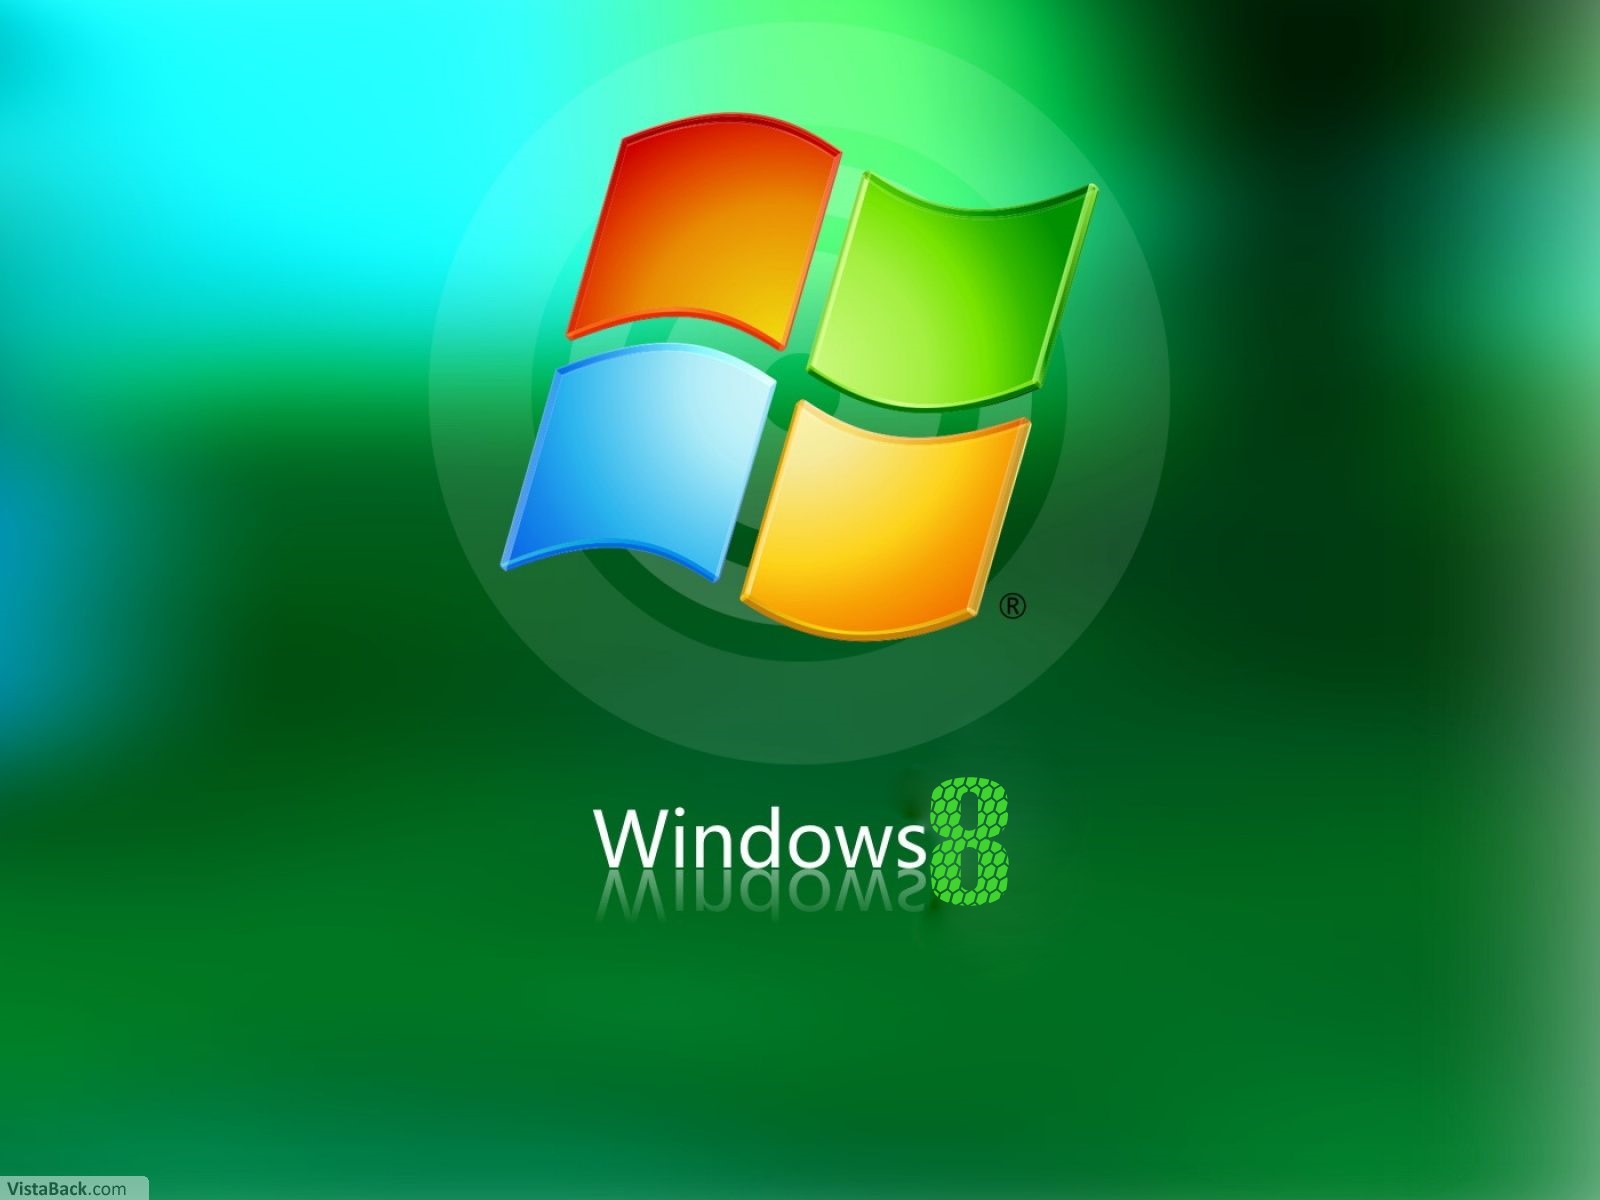 Amazing Windows Wallpaper Available For